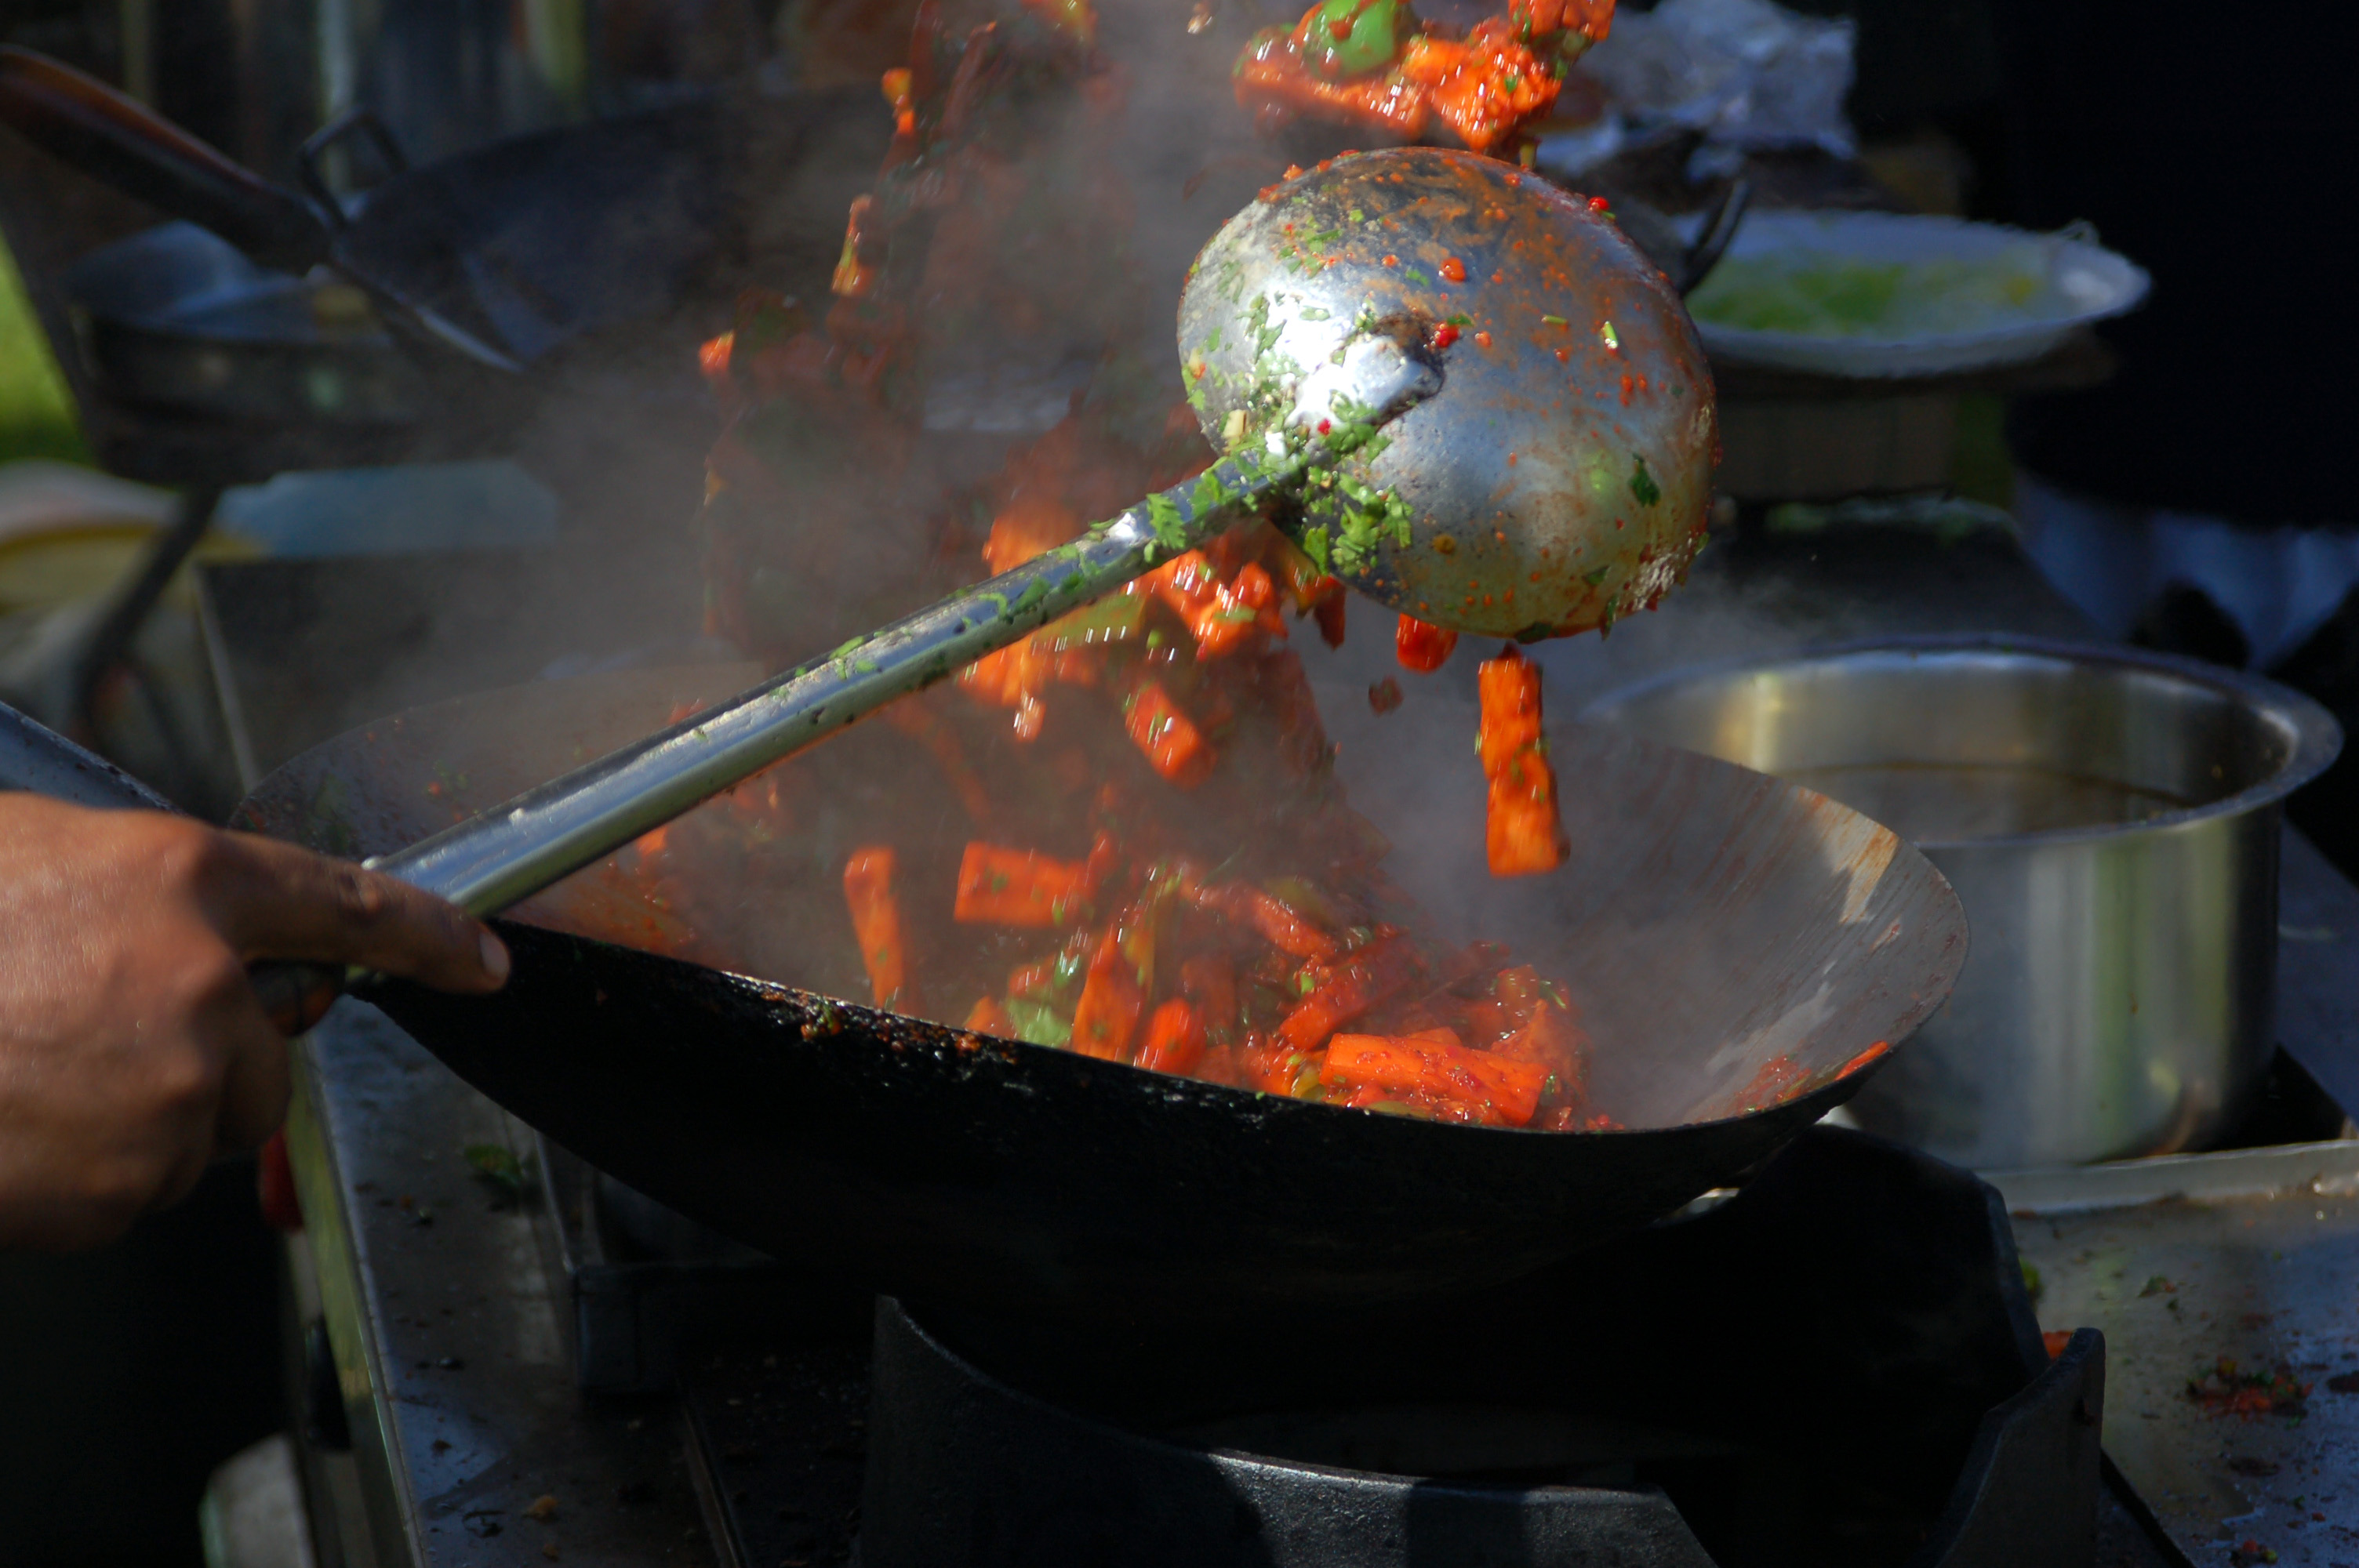 Stir-fry is a Chinese cooking technique. Learn more from the Confucius Institute